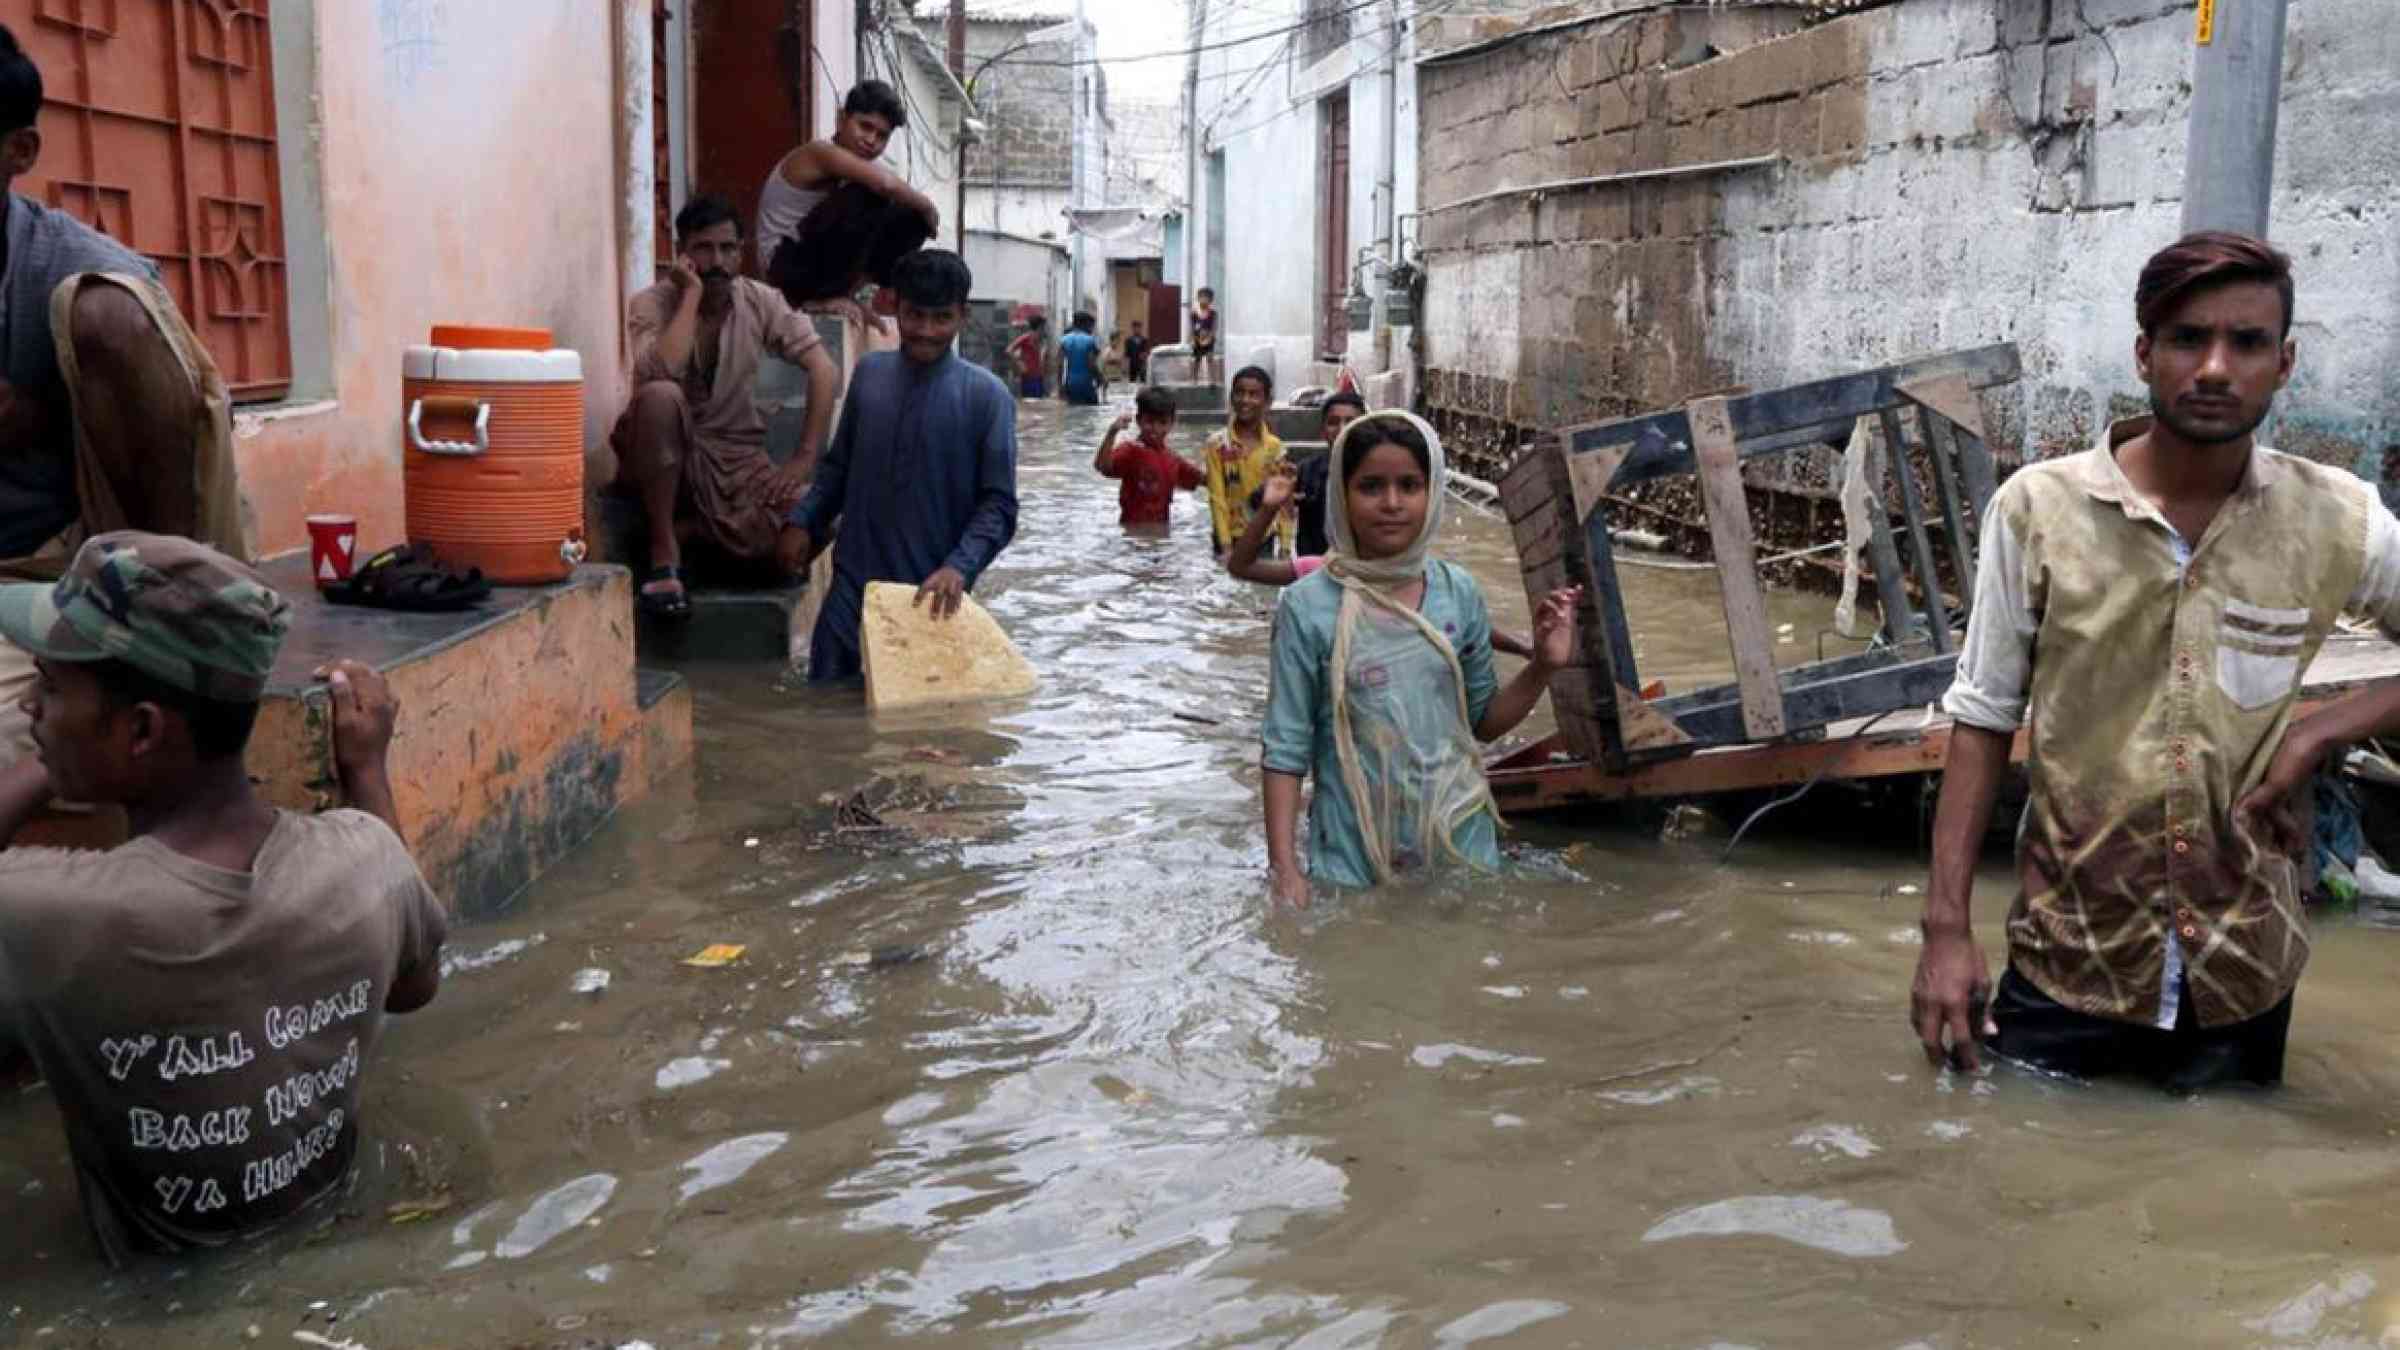 Residents are facing difficulties due to floods in Karachi, Pakistan (2020). Asianet-Pakistan/Shutterstock